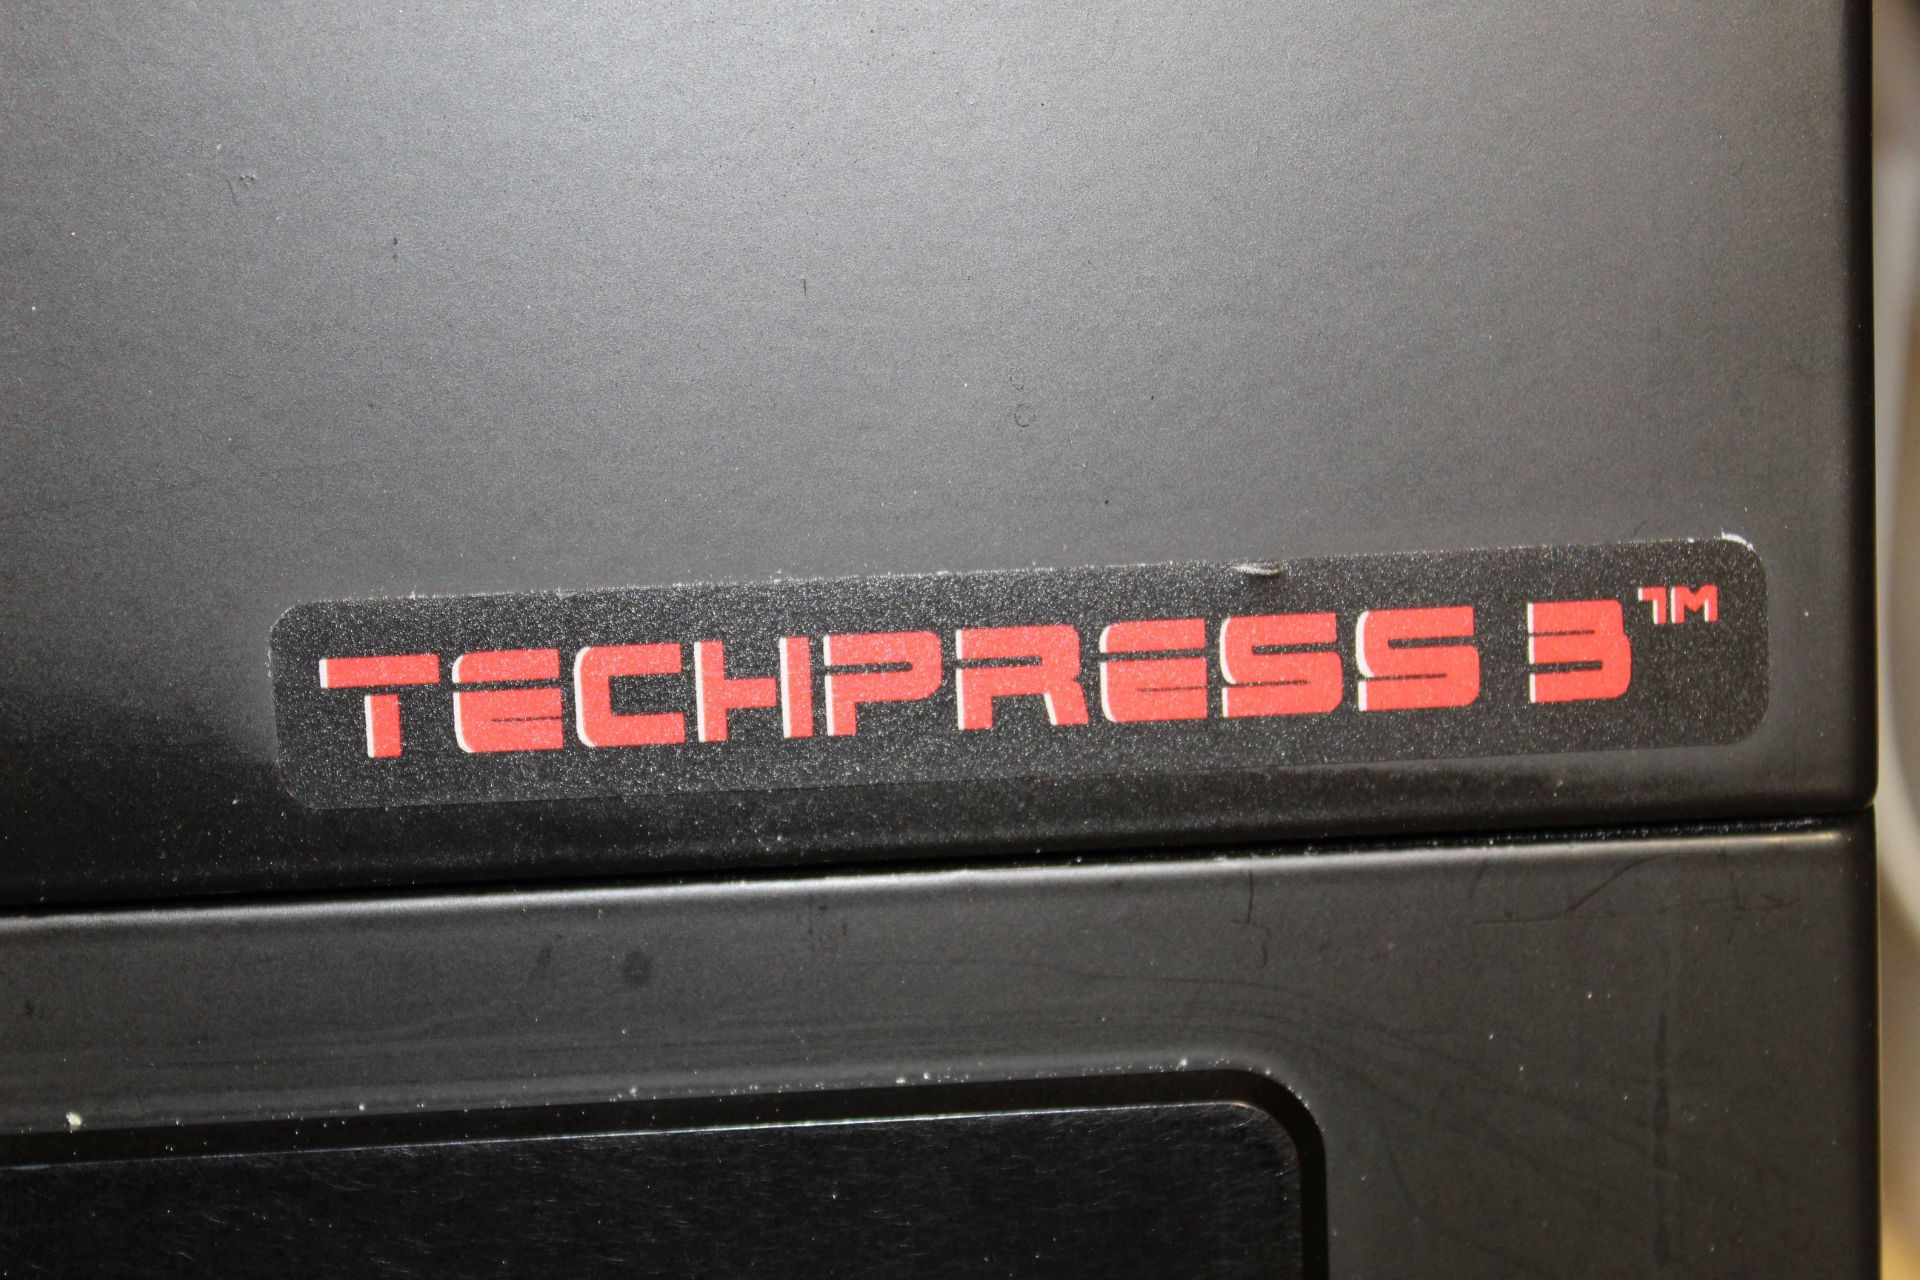 MOUNTING PRESS, ALLIED HIGH TECH PRODUCTS MDL. TechPress 3, 1,500 watt heating power, up to 4,500 - Image 3 of 3